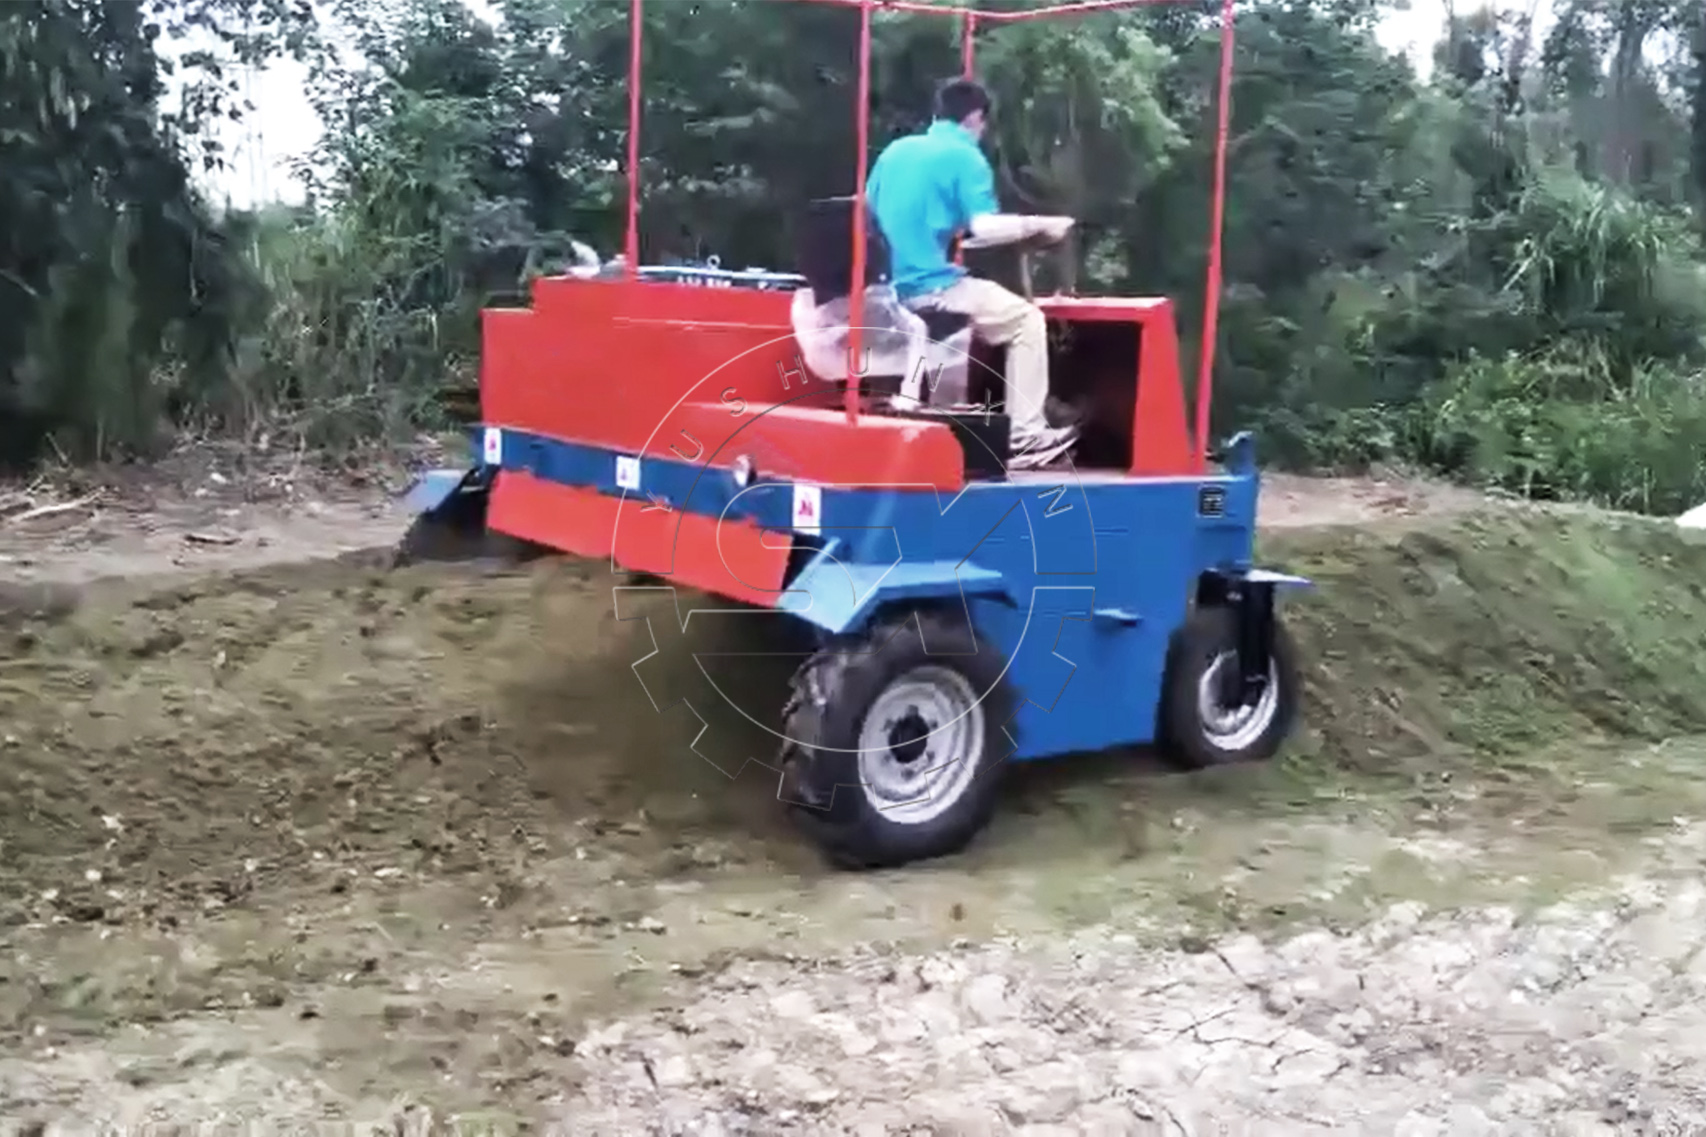 Moving Type Composting Machine in Operation